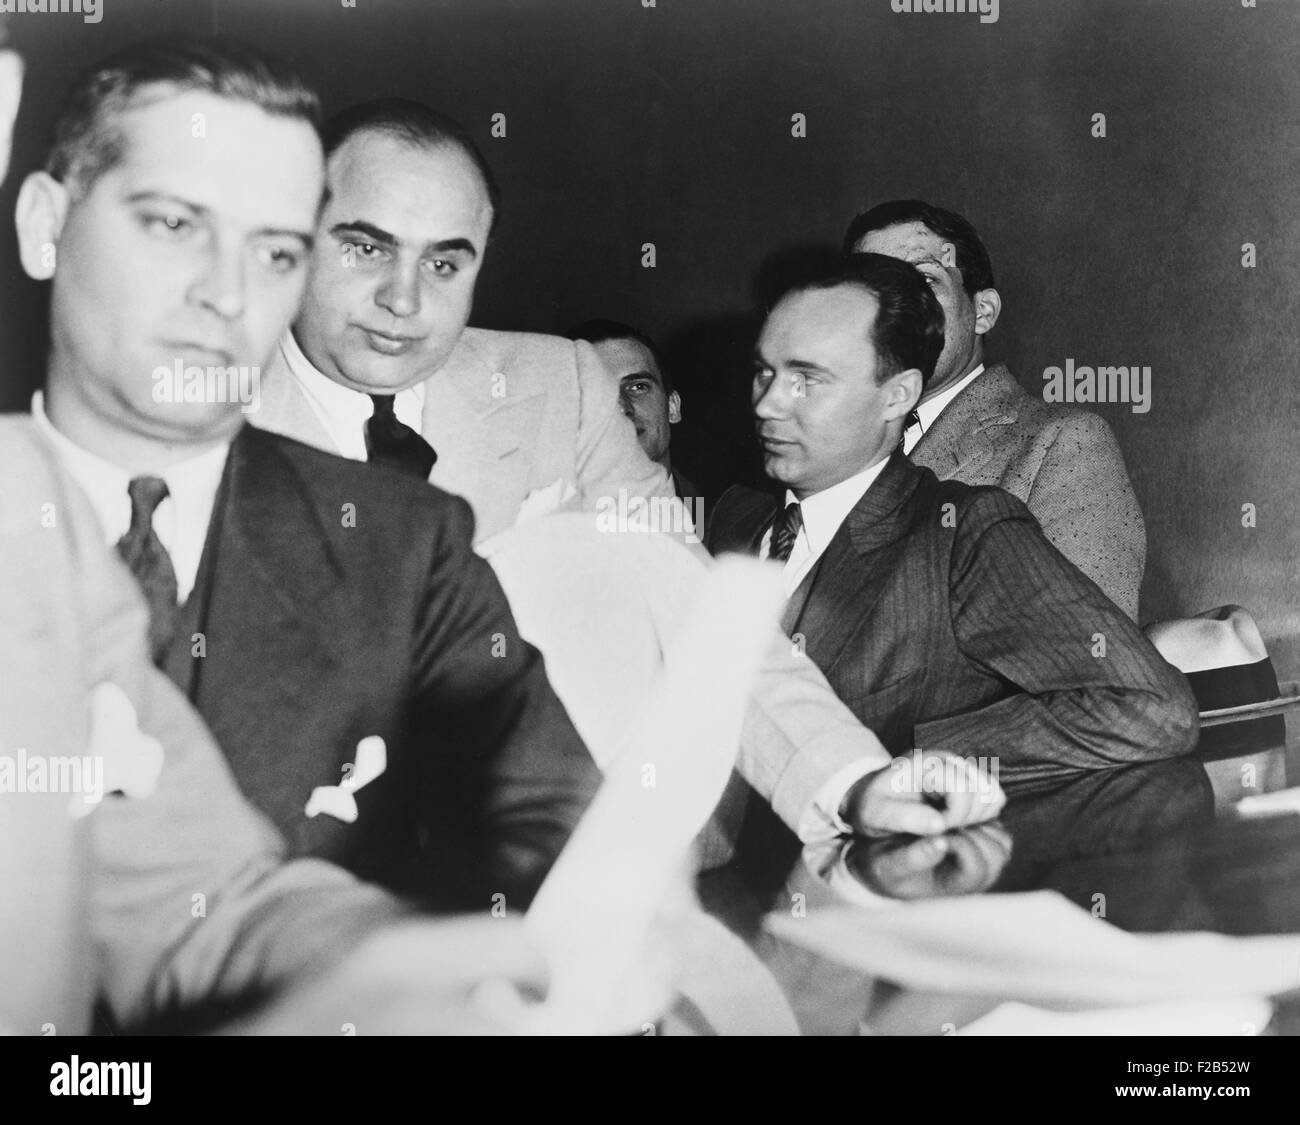 Al Capone, at the time of his indictment for tax evasion, June 5, 1931. At right is one of Capone's attorneys, Michael Ahern. - Stock Photo